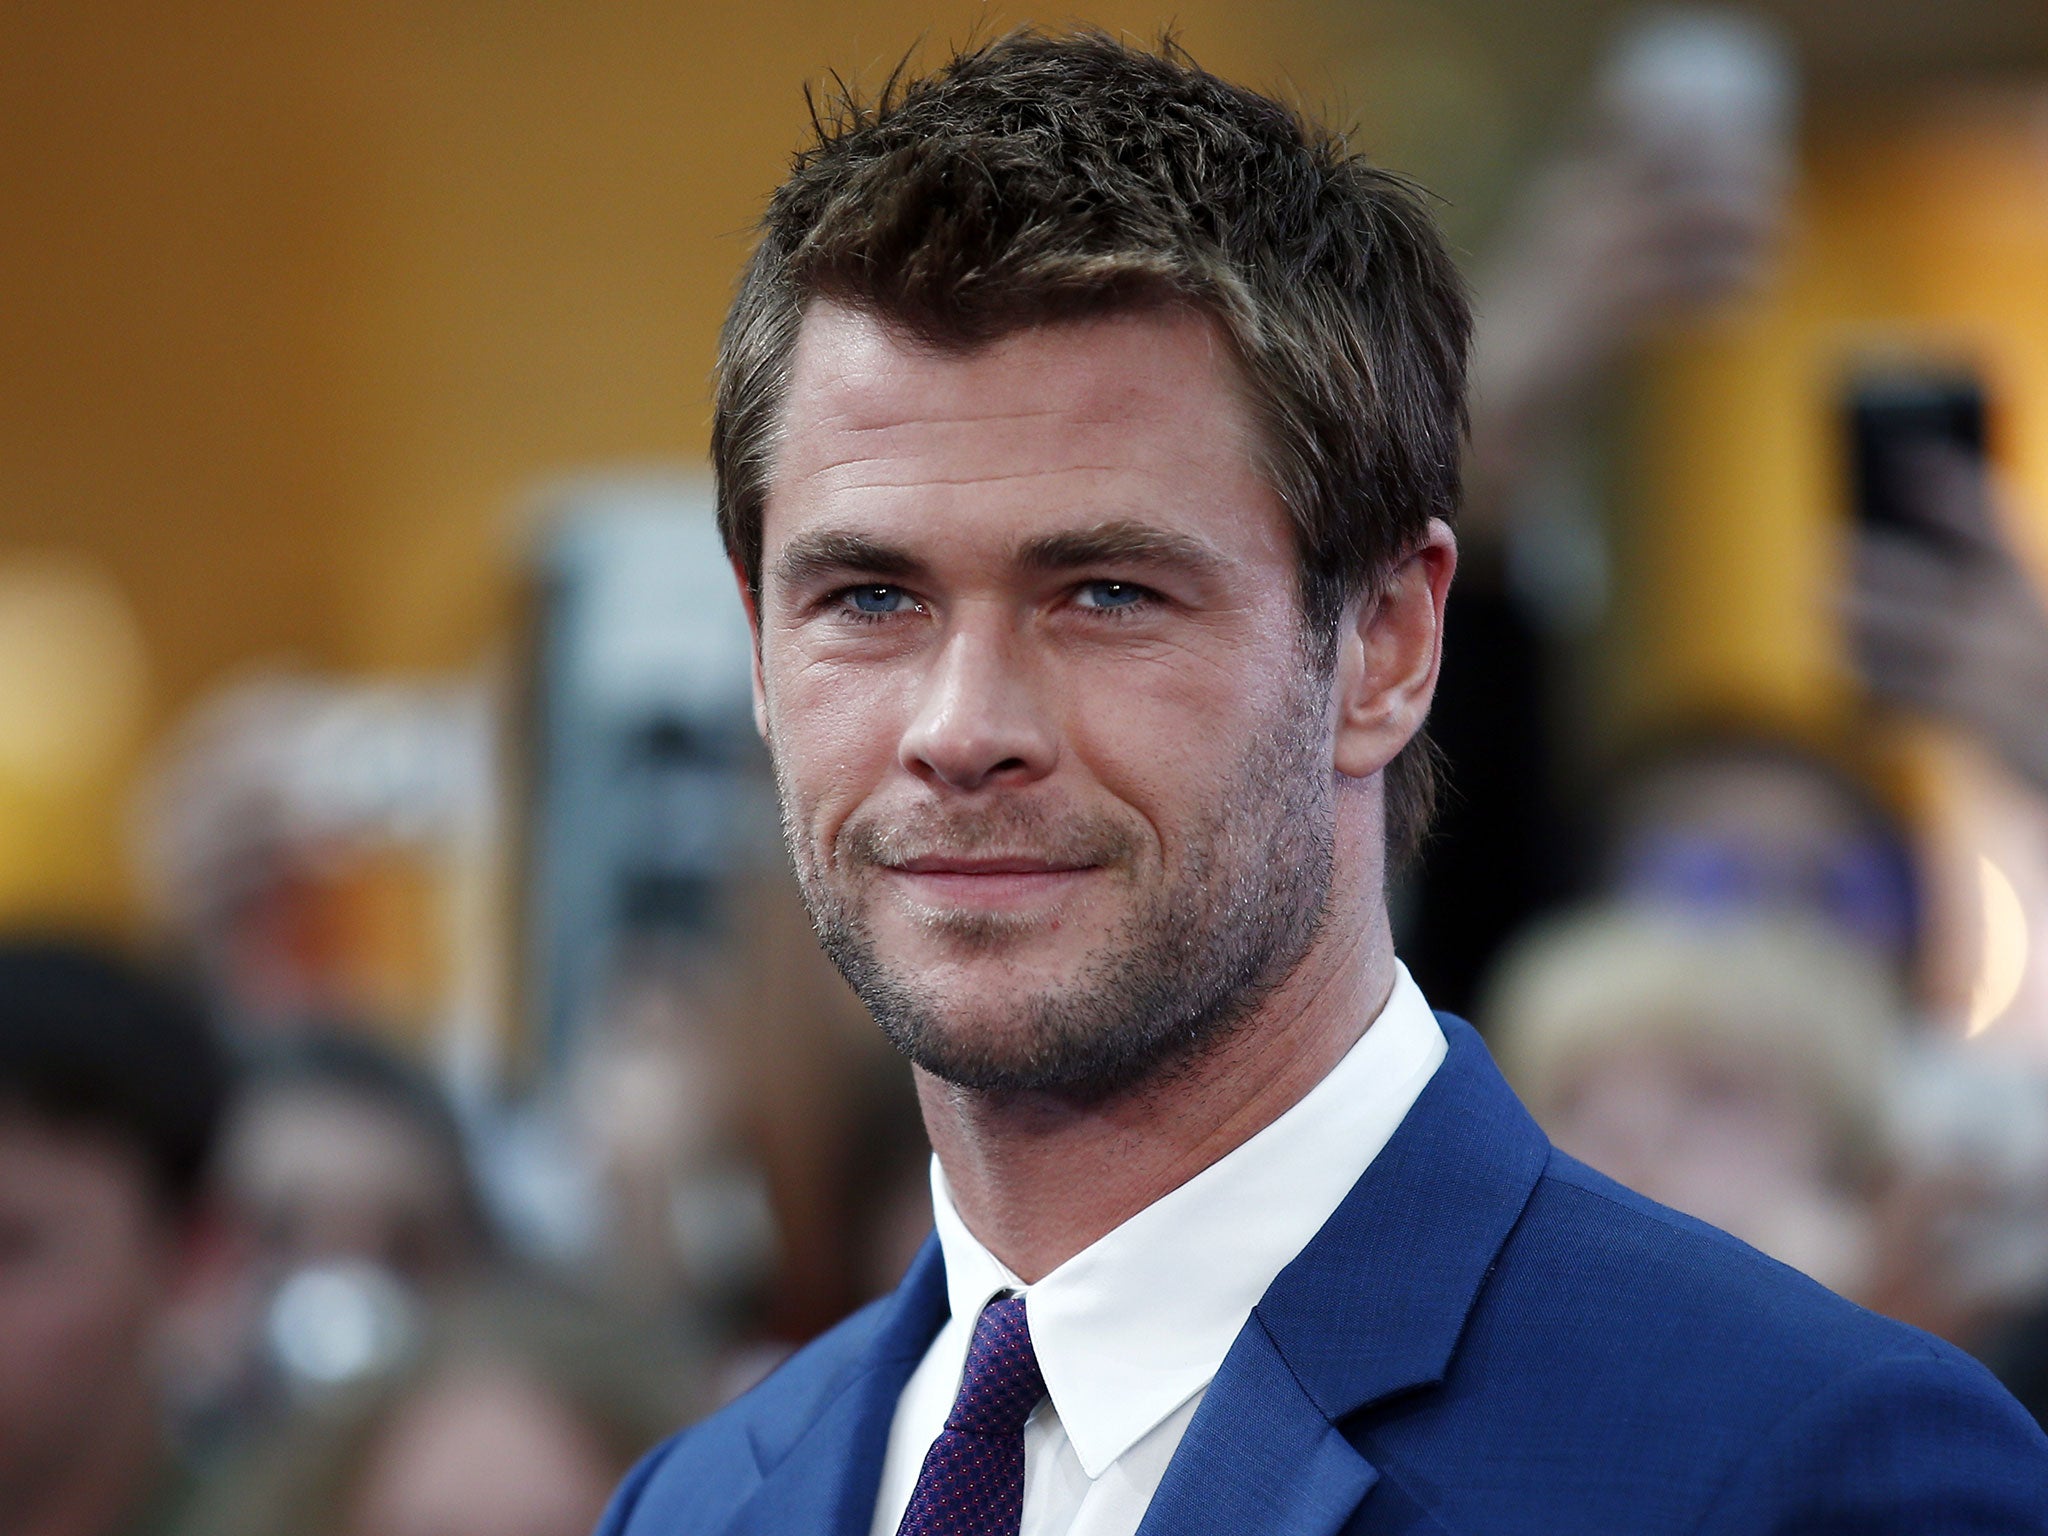 Chris Hemsworth apologises for cultural appropriation for Native